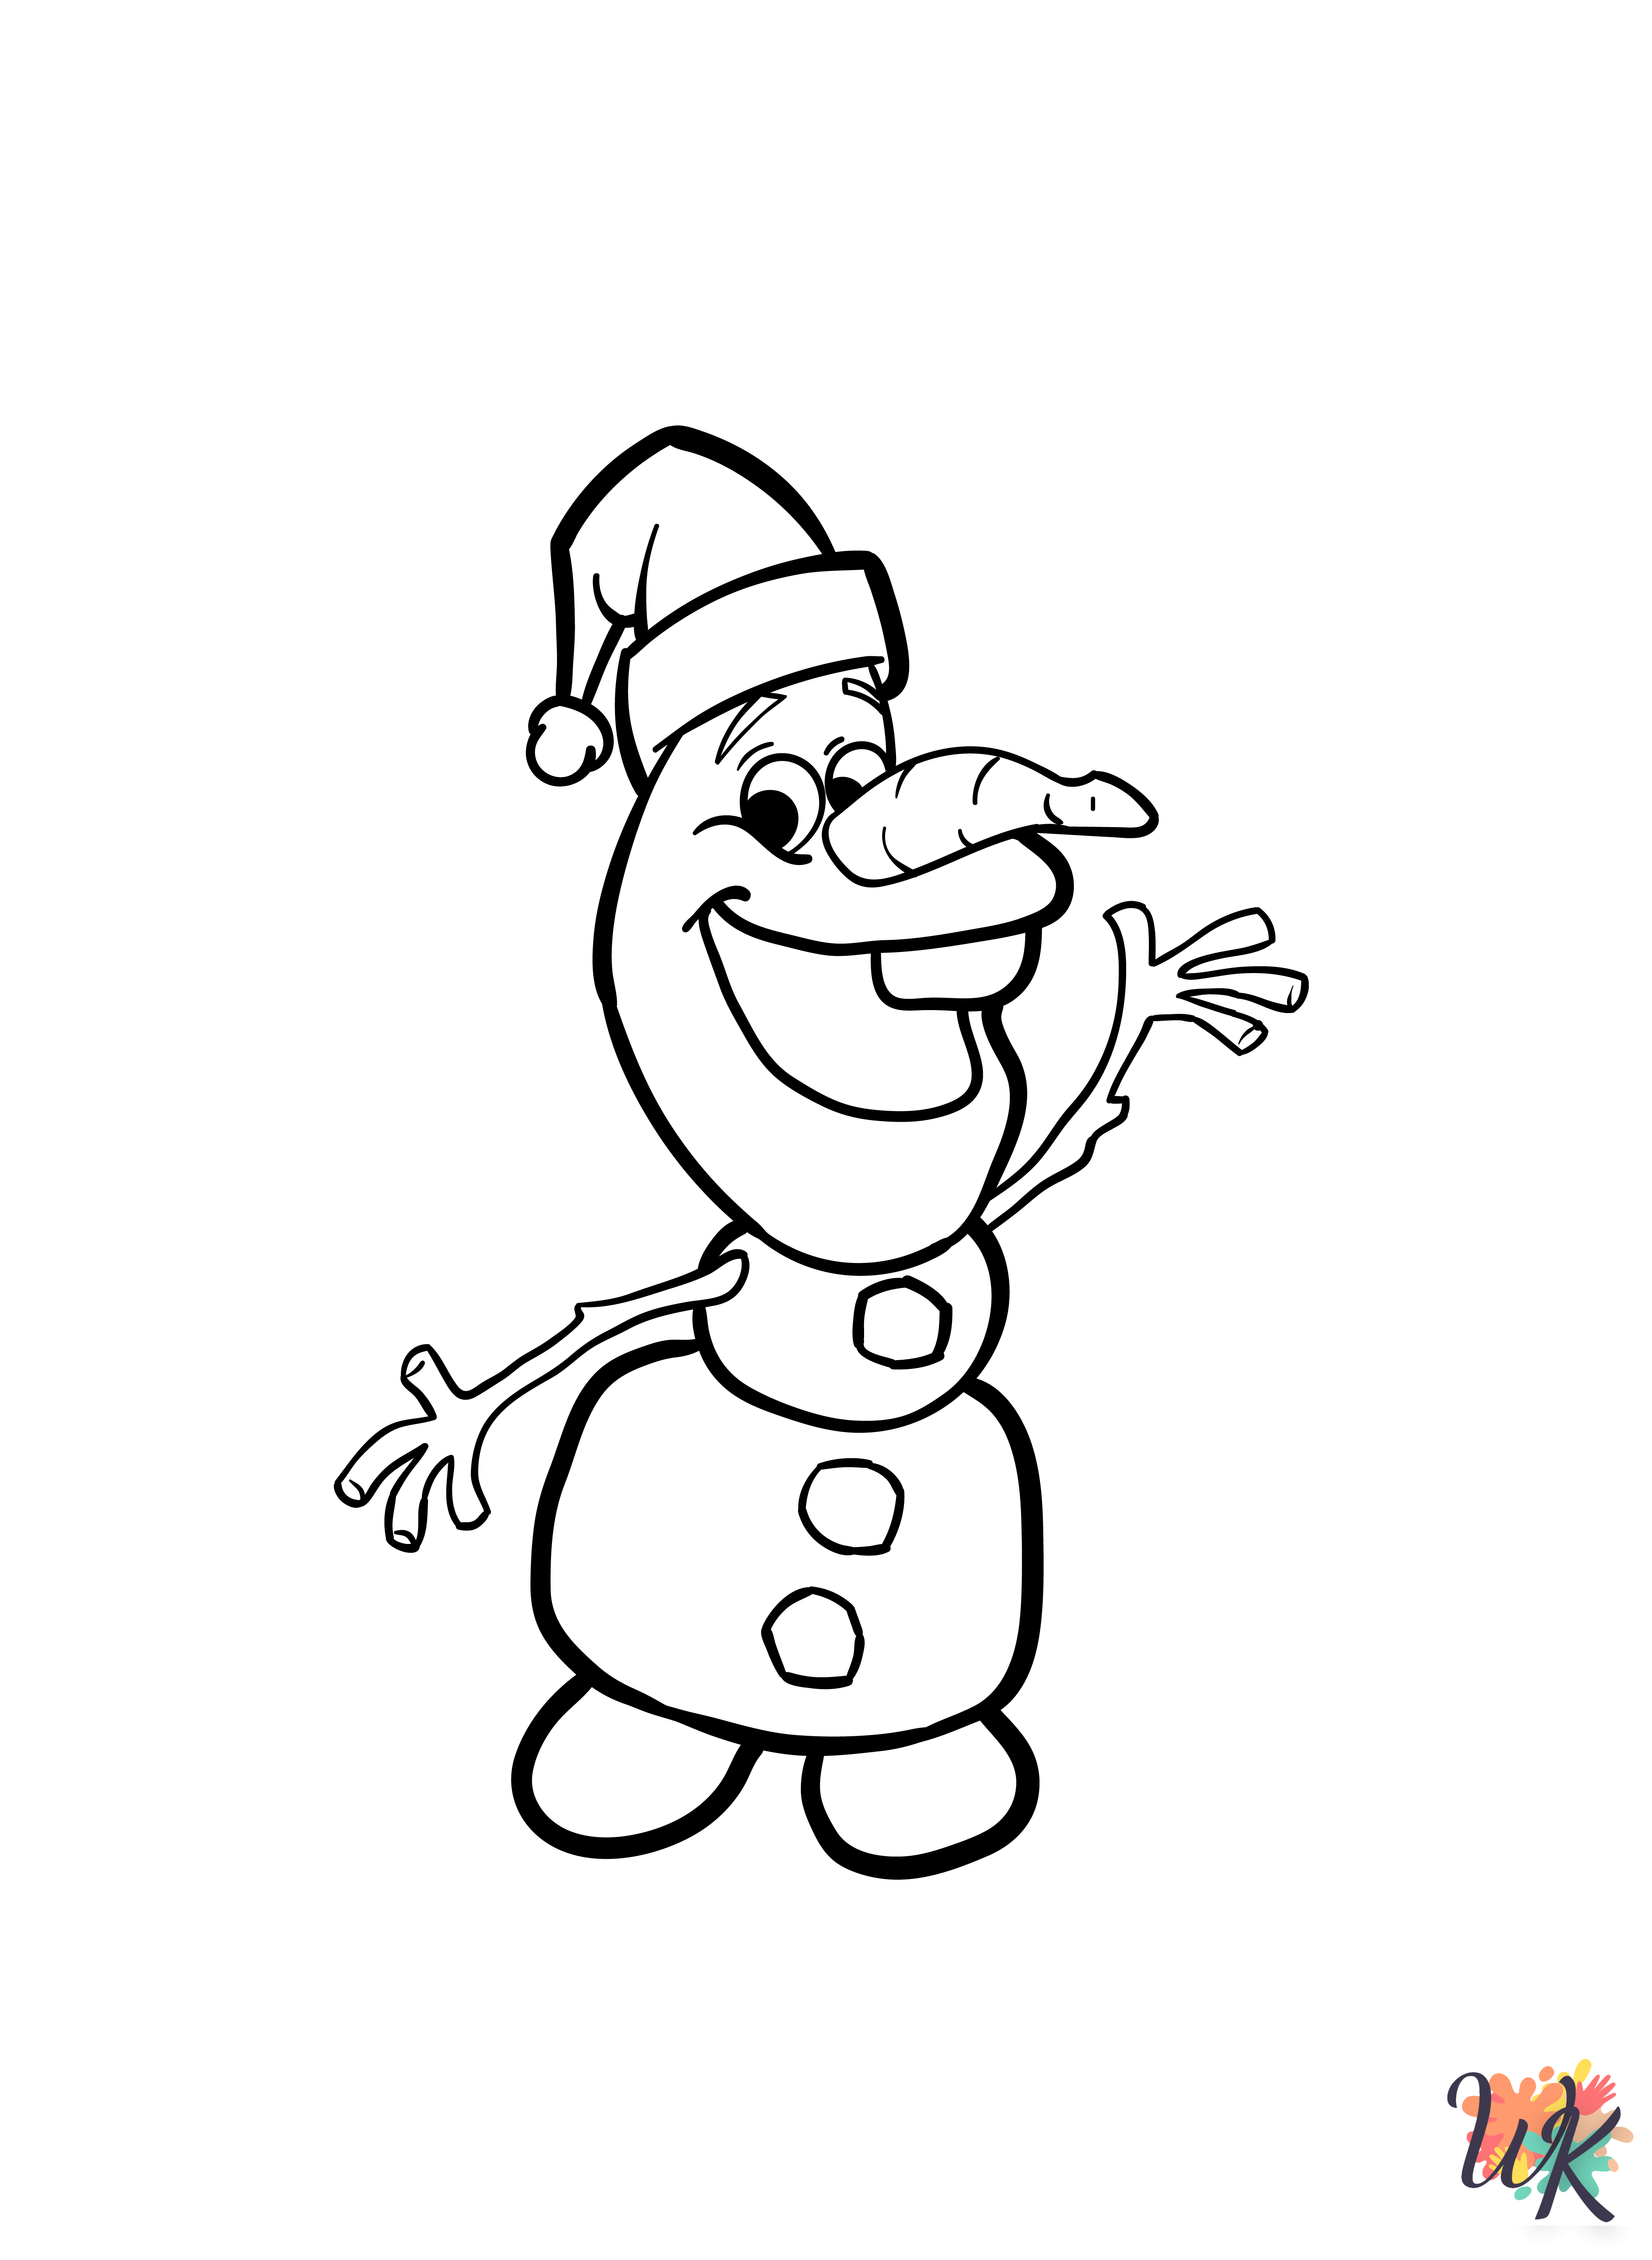 Olaf coloring pages to print